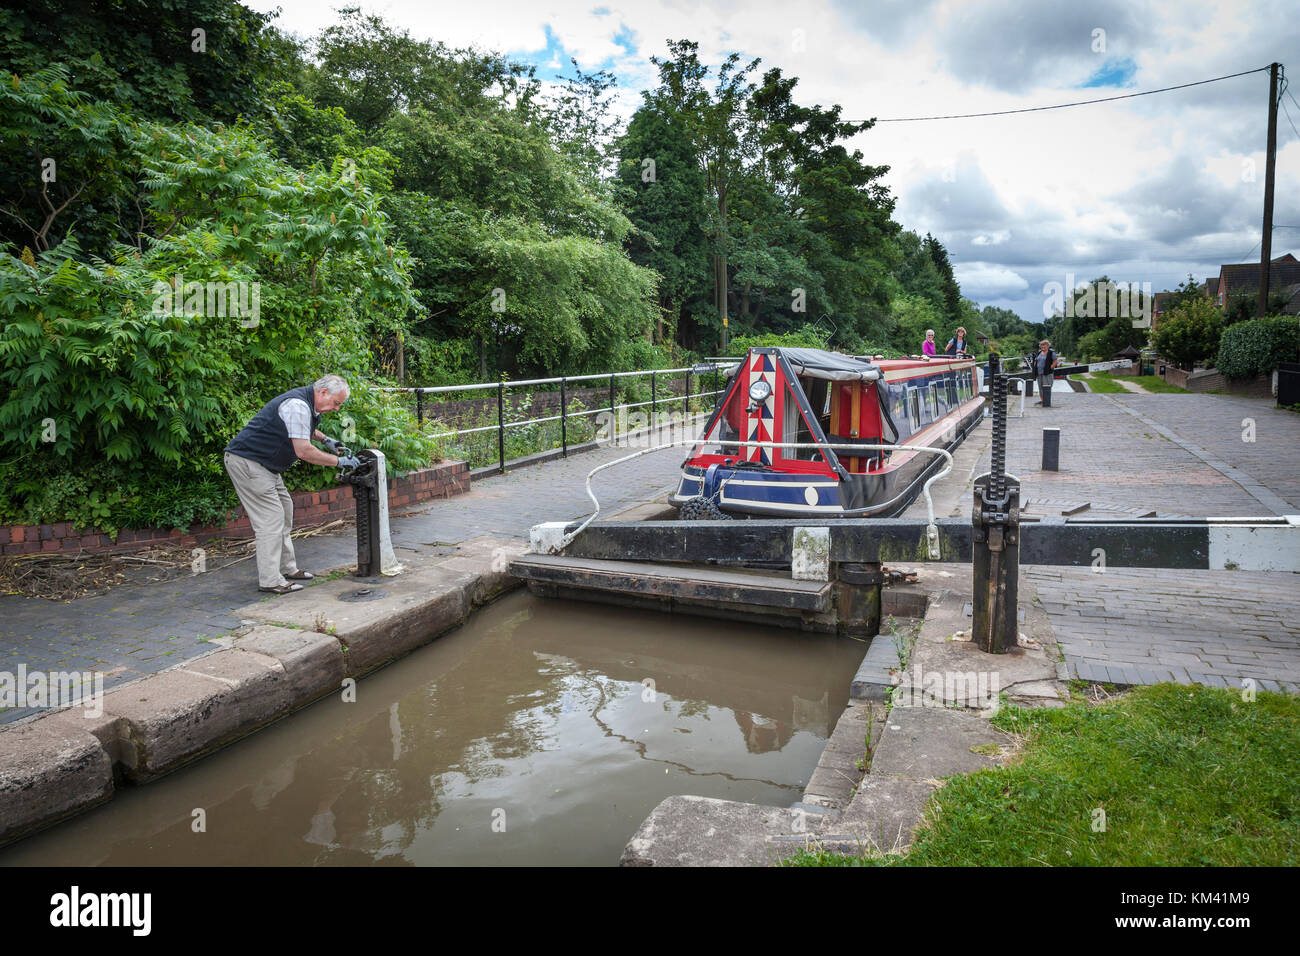 A man prepares to open a lock and release a narrowboat on the Coventry canal, Staffordshire, England. Stock Photo